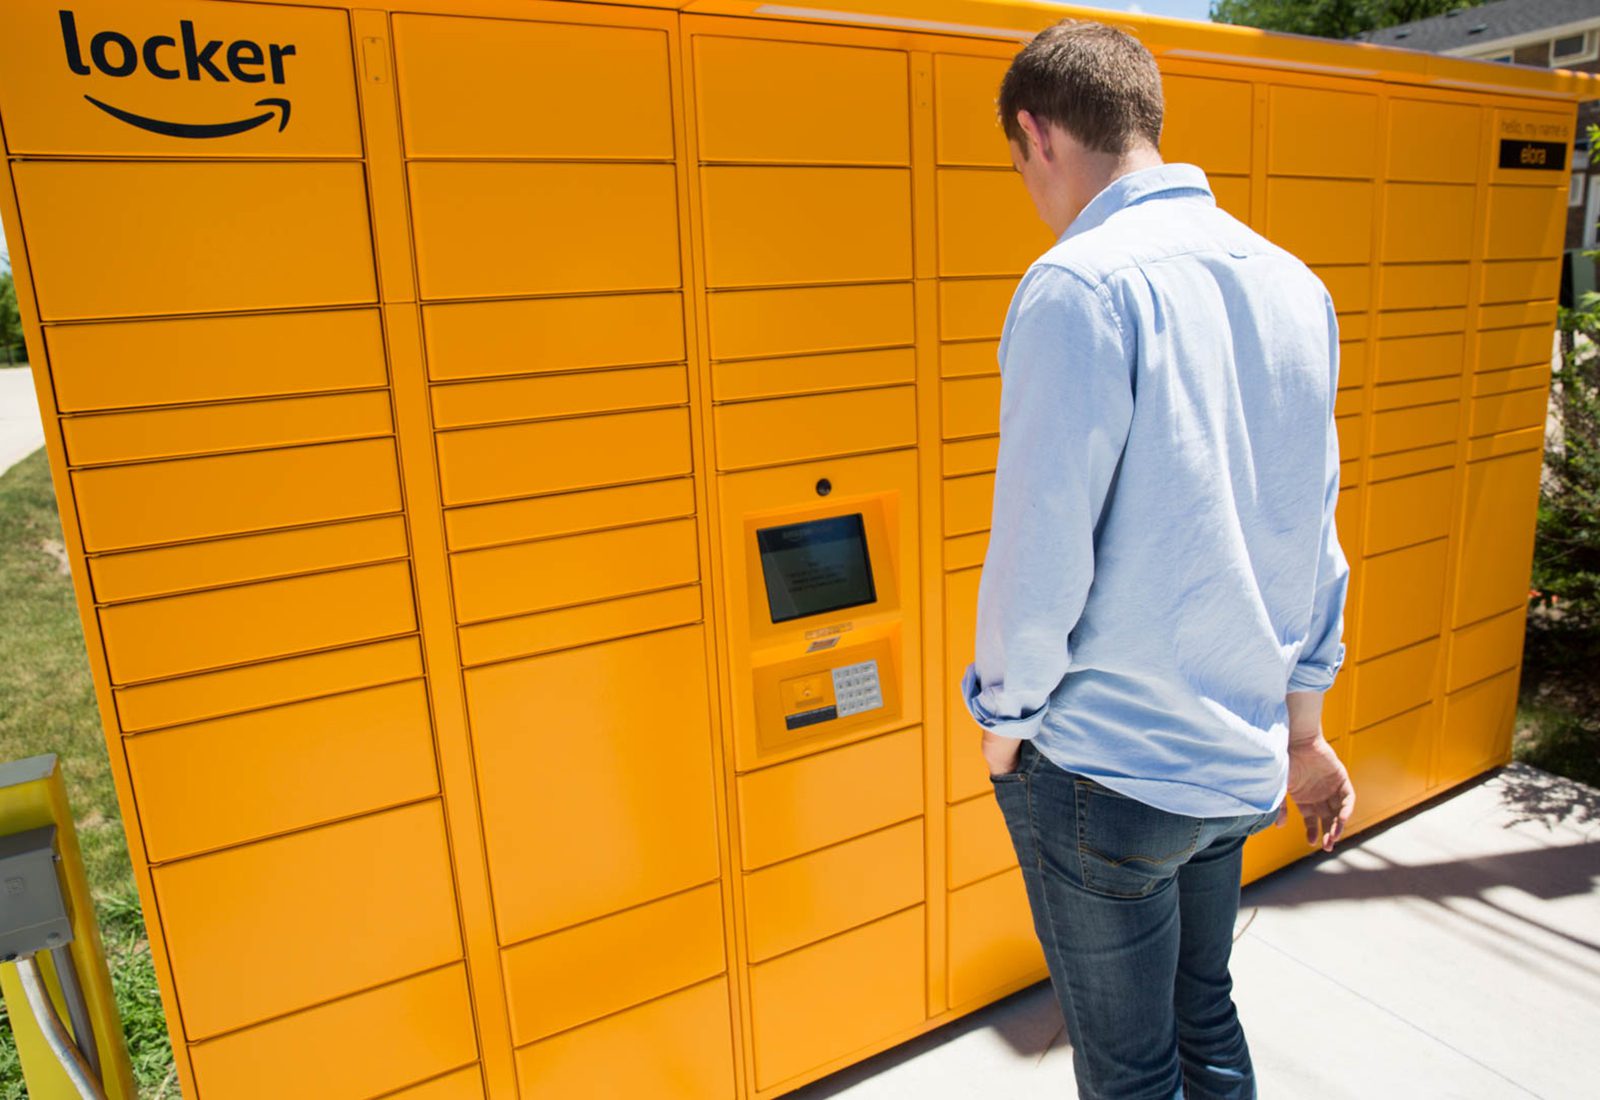 Olivet_Amazon Locker_on campus_student services_delivery_2018_Web.jpg